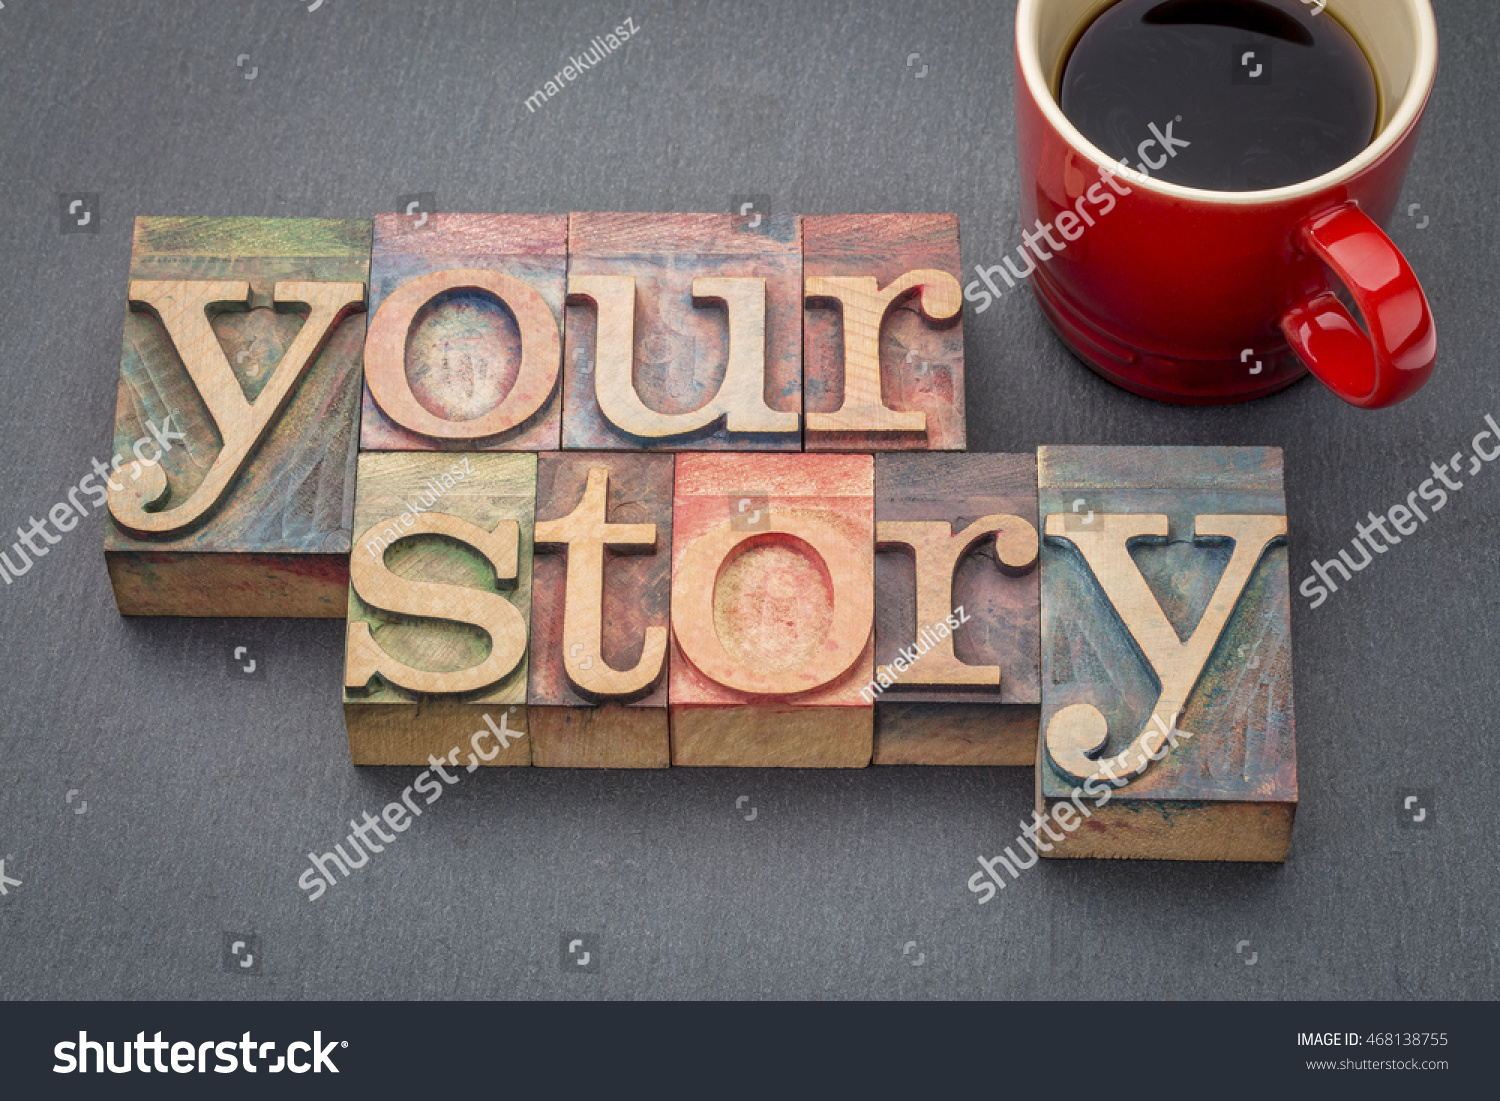 your story - word abstract in  letterpress wood type stained by color inks against a slate stone with a cup of coffee #468138755